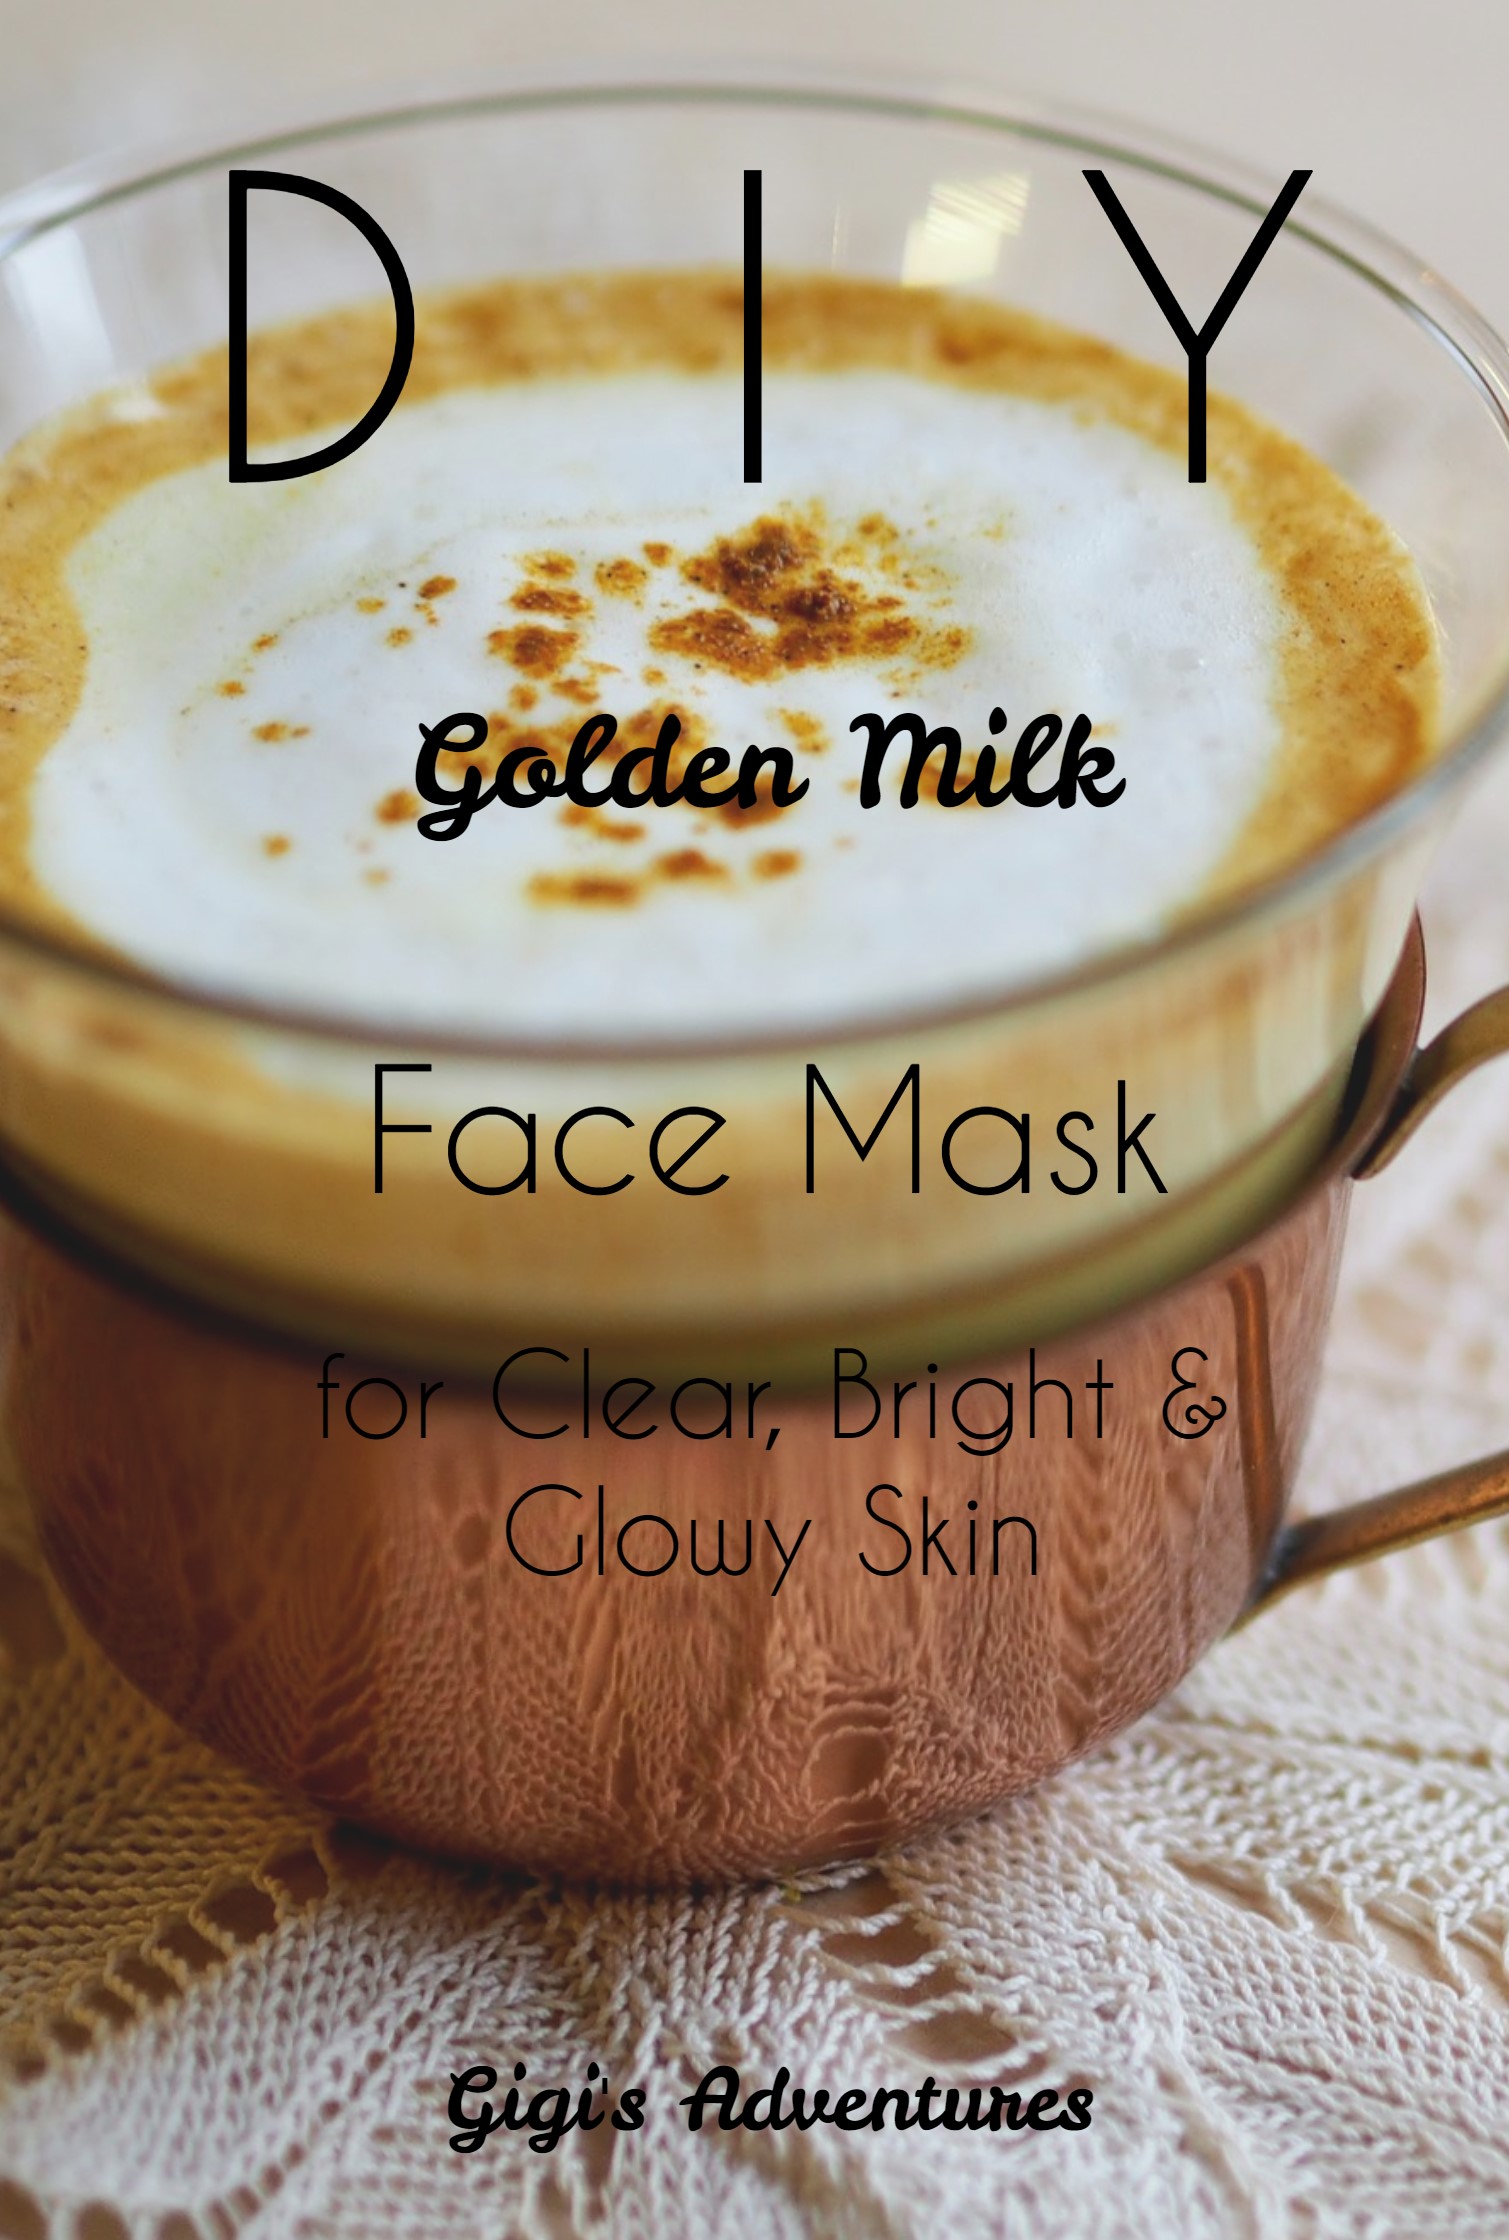 DIY Golden Milk Face Mask - for Super Clear and Glowy Skin!